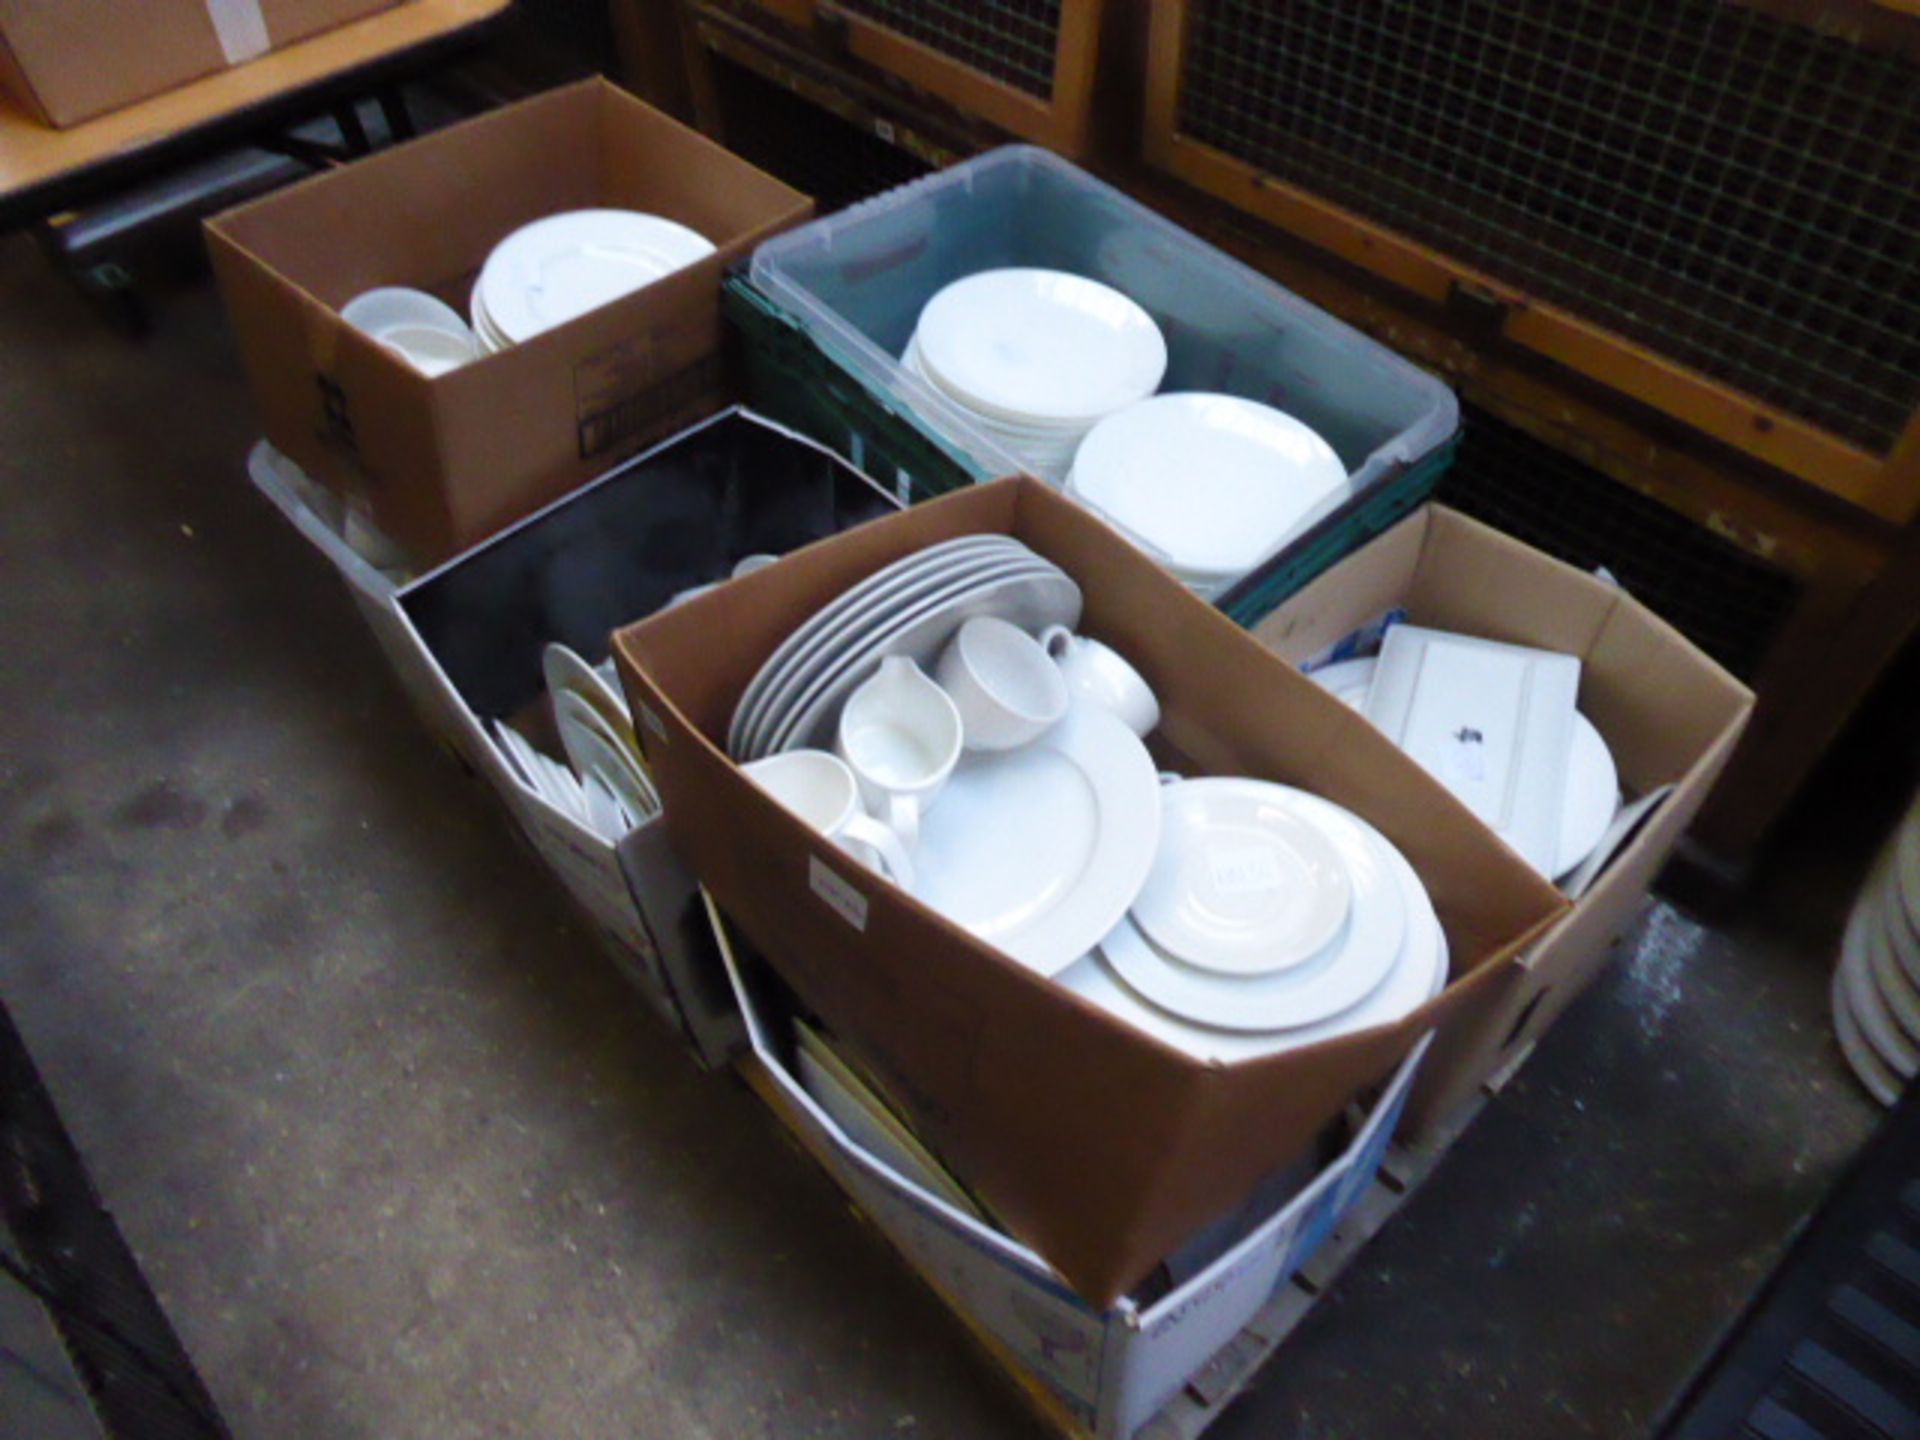 A pallet with 8 boxes of assorted white crockery including plates, cups, saucers, milk jugs etc